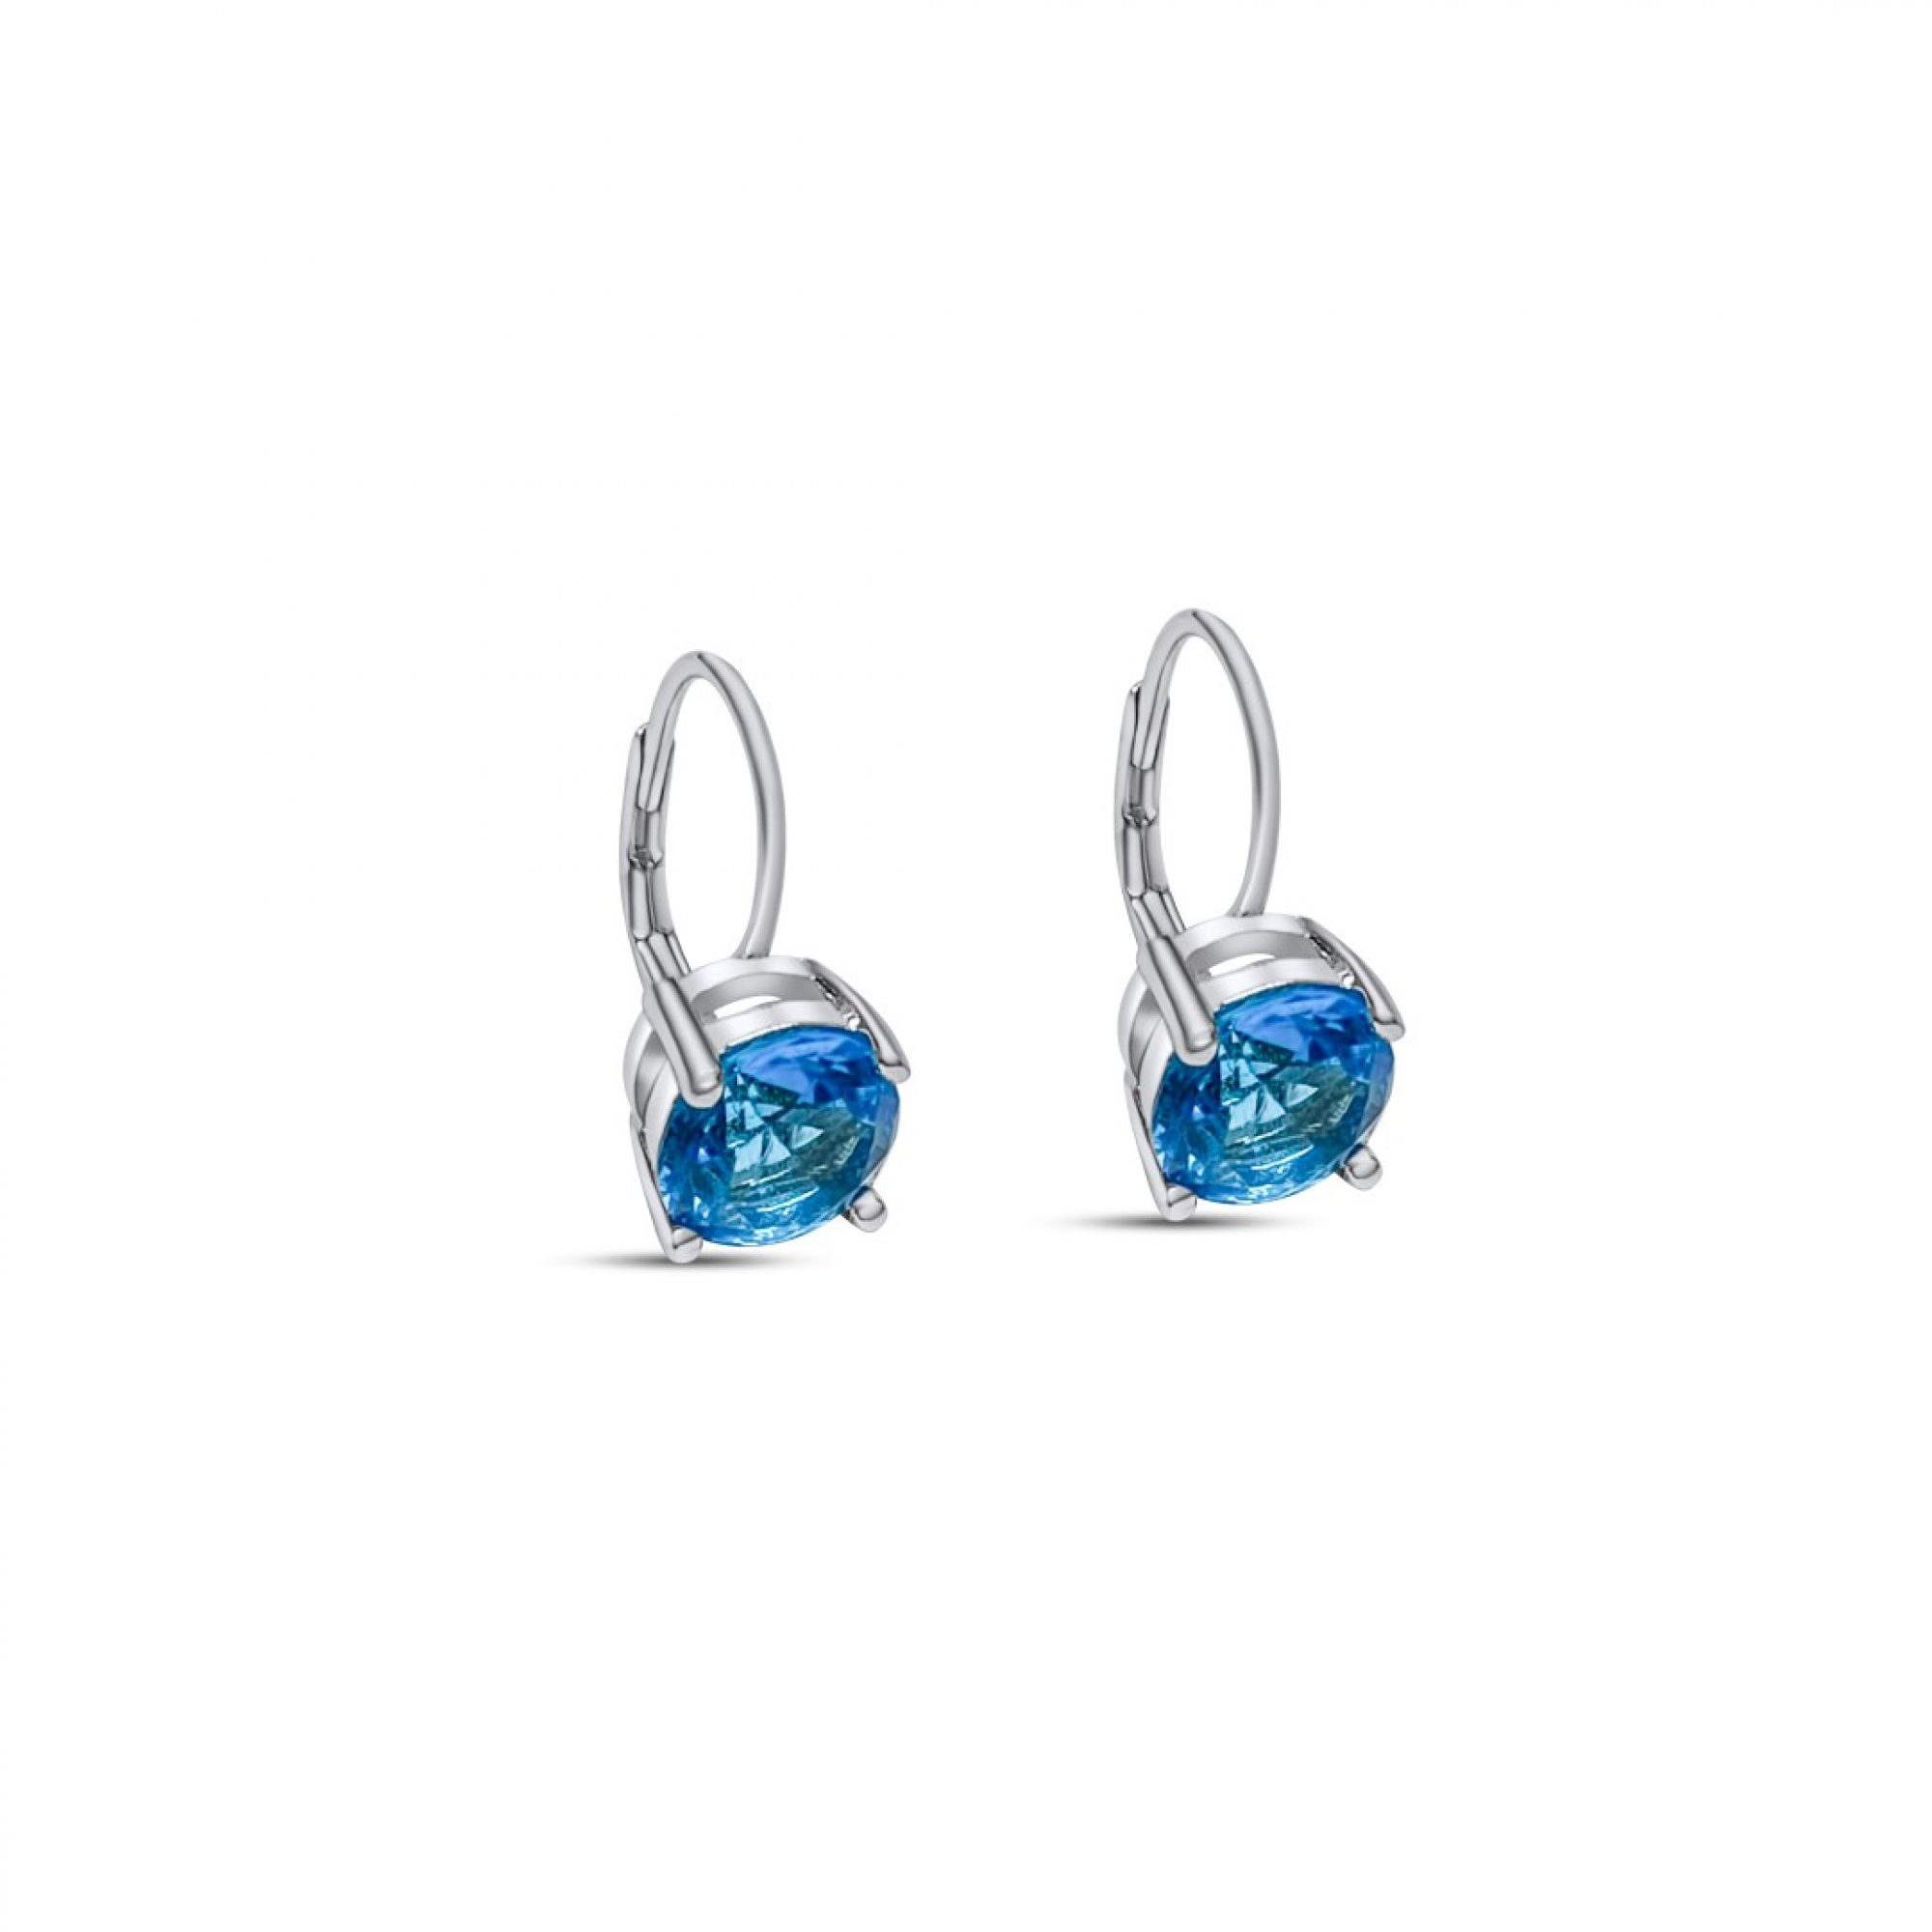 Silver earrings with aquamarine stone